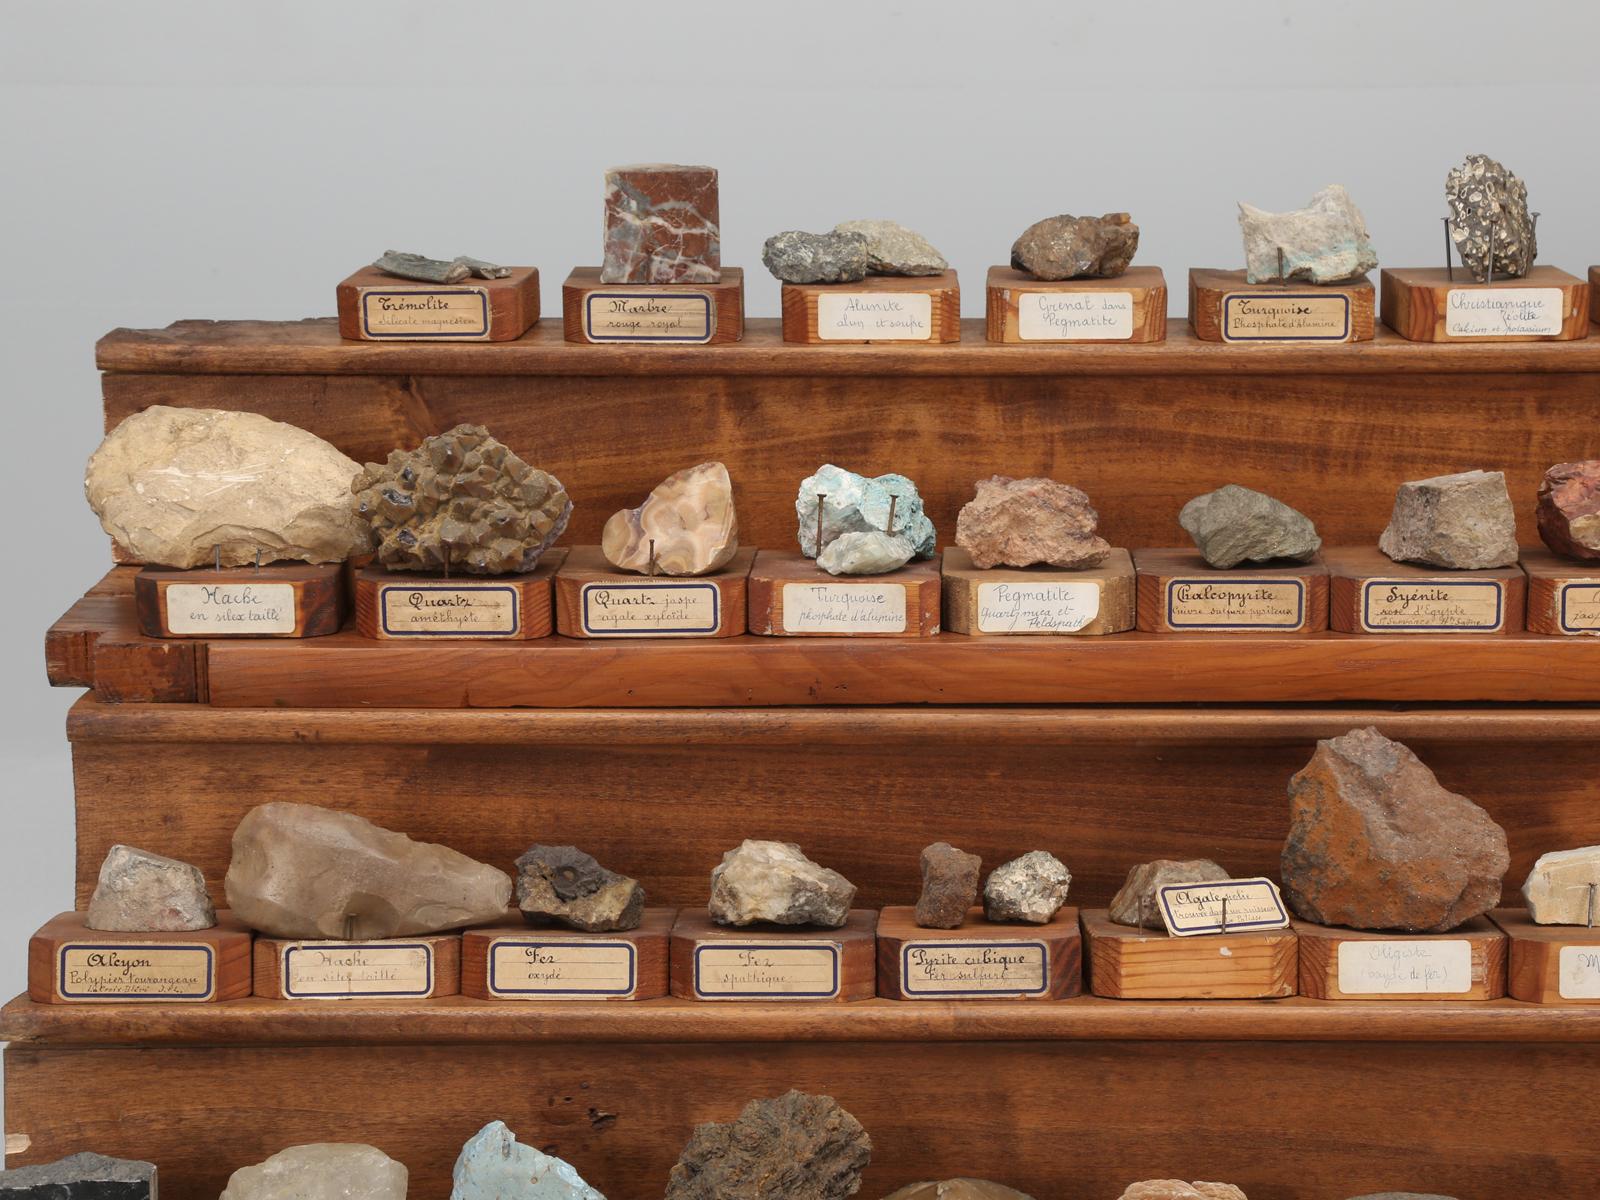 An absolutely incredible mineral specimen collection, recently removed from a French Monastery School, that was about to be converted into a hotel. The school, “House of Marist Brothers”, opened in the early 1890s in the town of Varennes-sur-Allier,